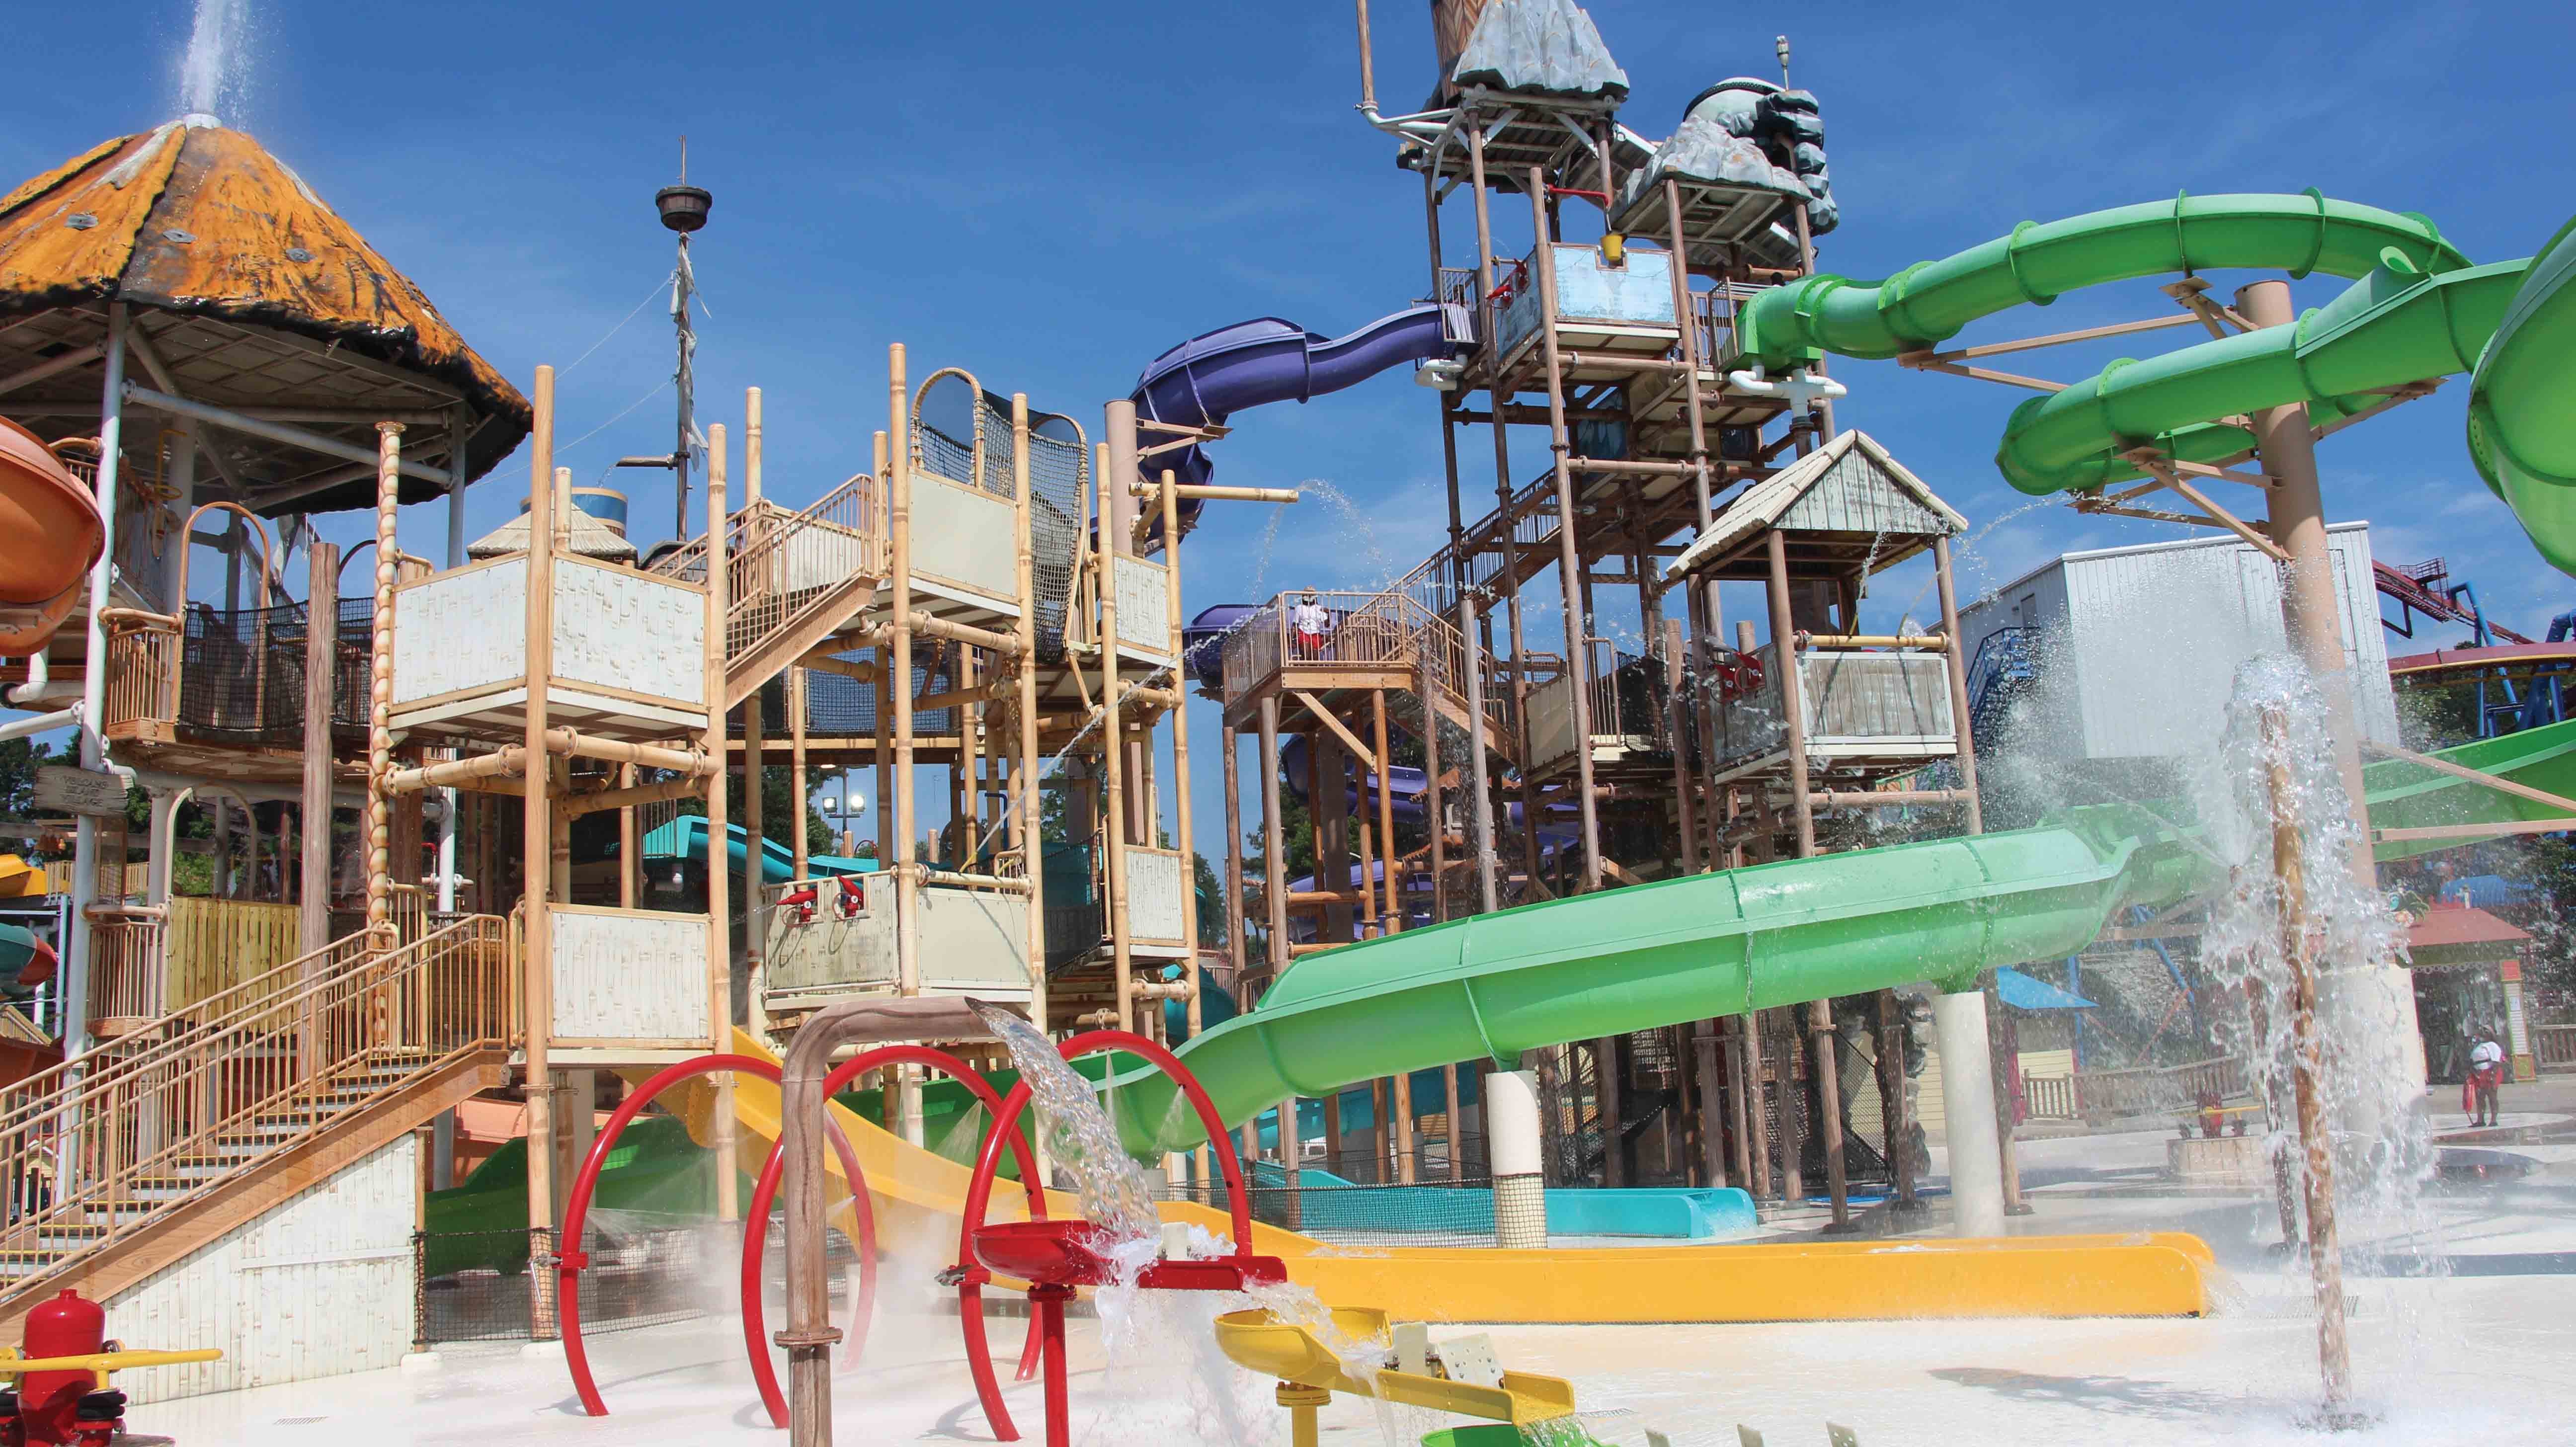 What water parks are located in Georgia?